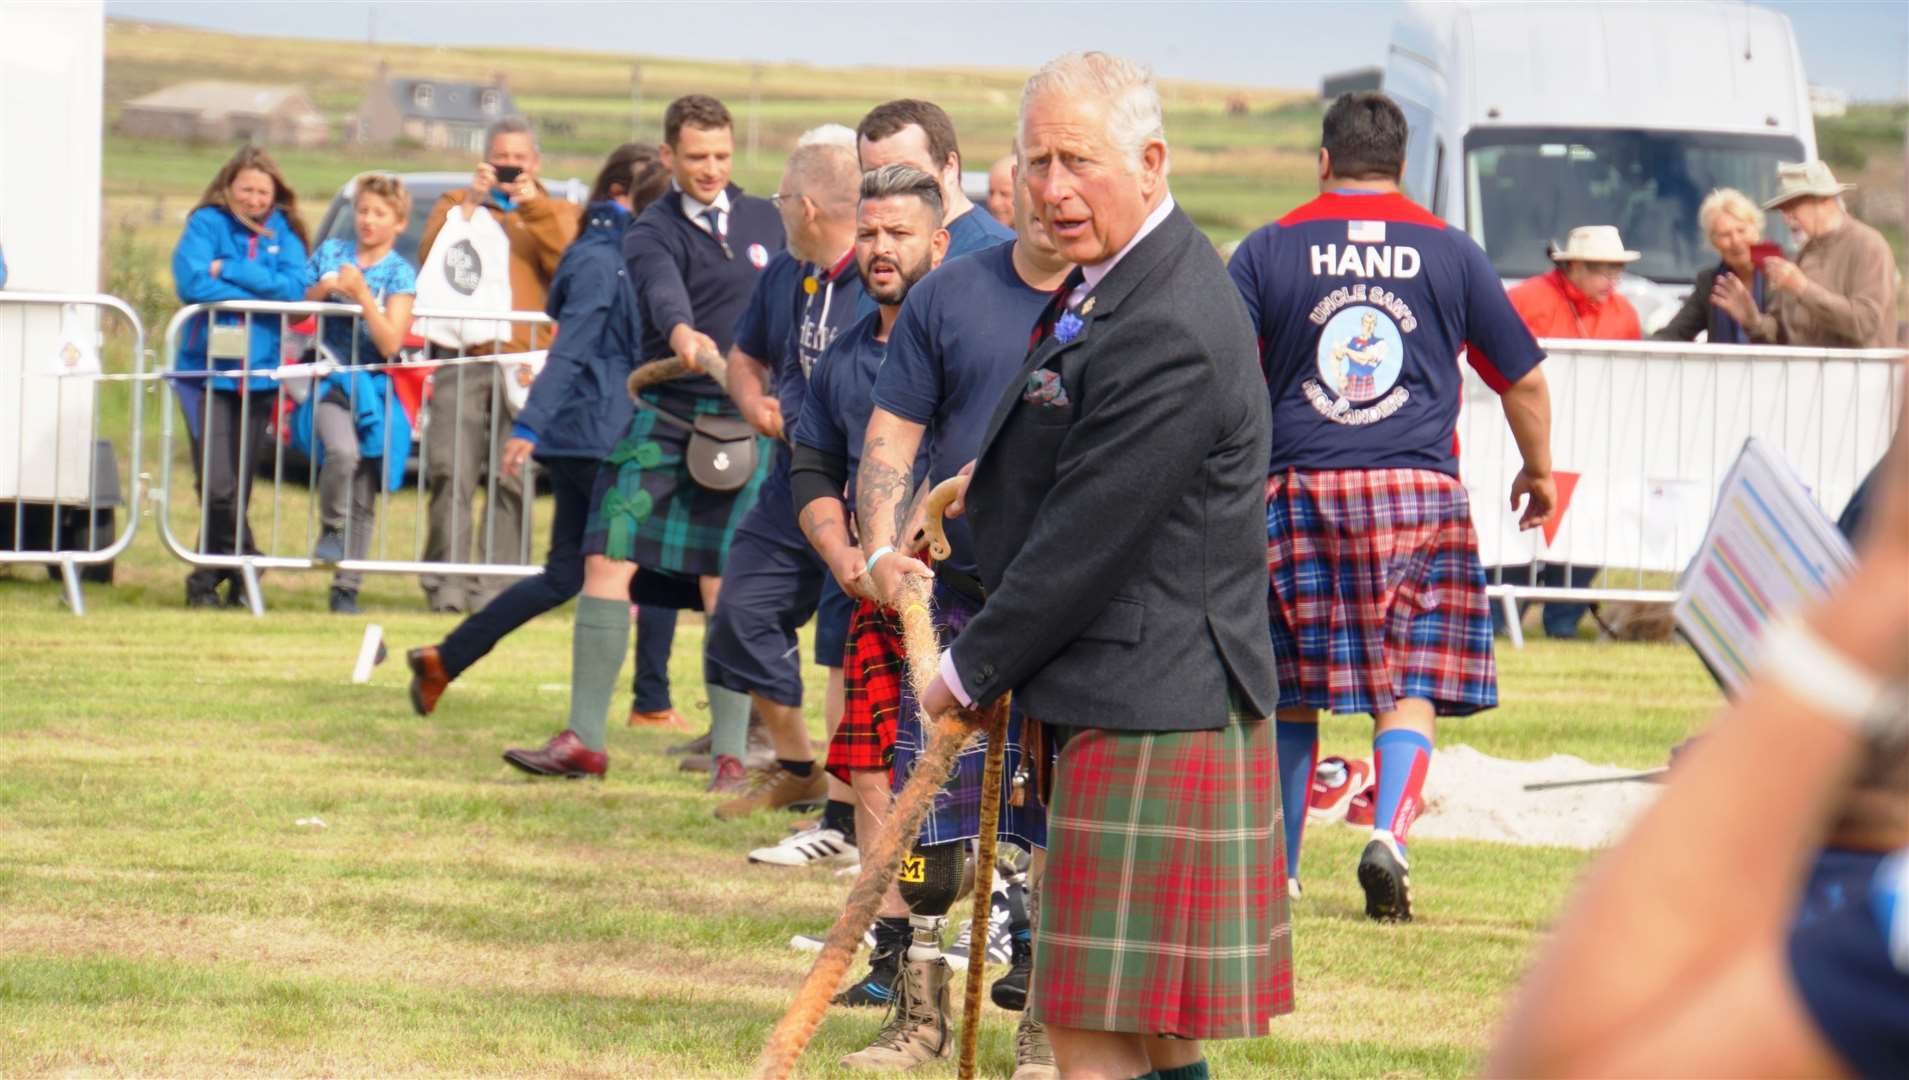 Prince Charles presides over the tug of war competition at the 2018 Mey Games. Photo: DGS